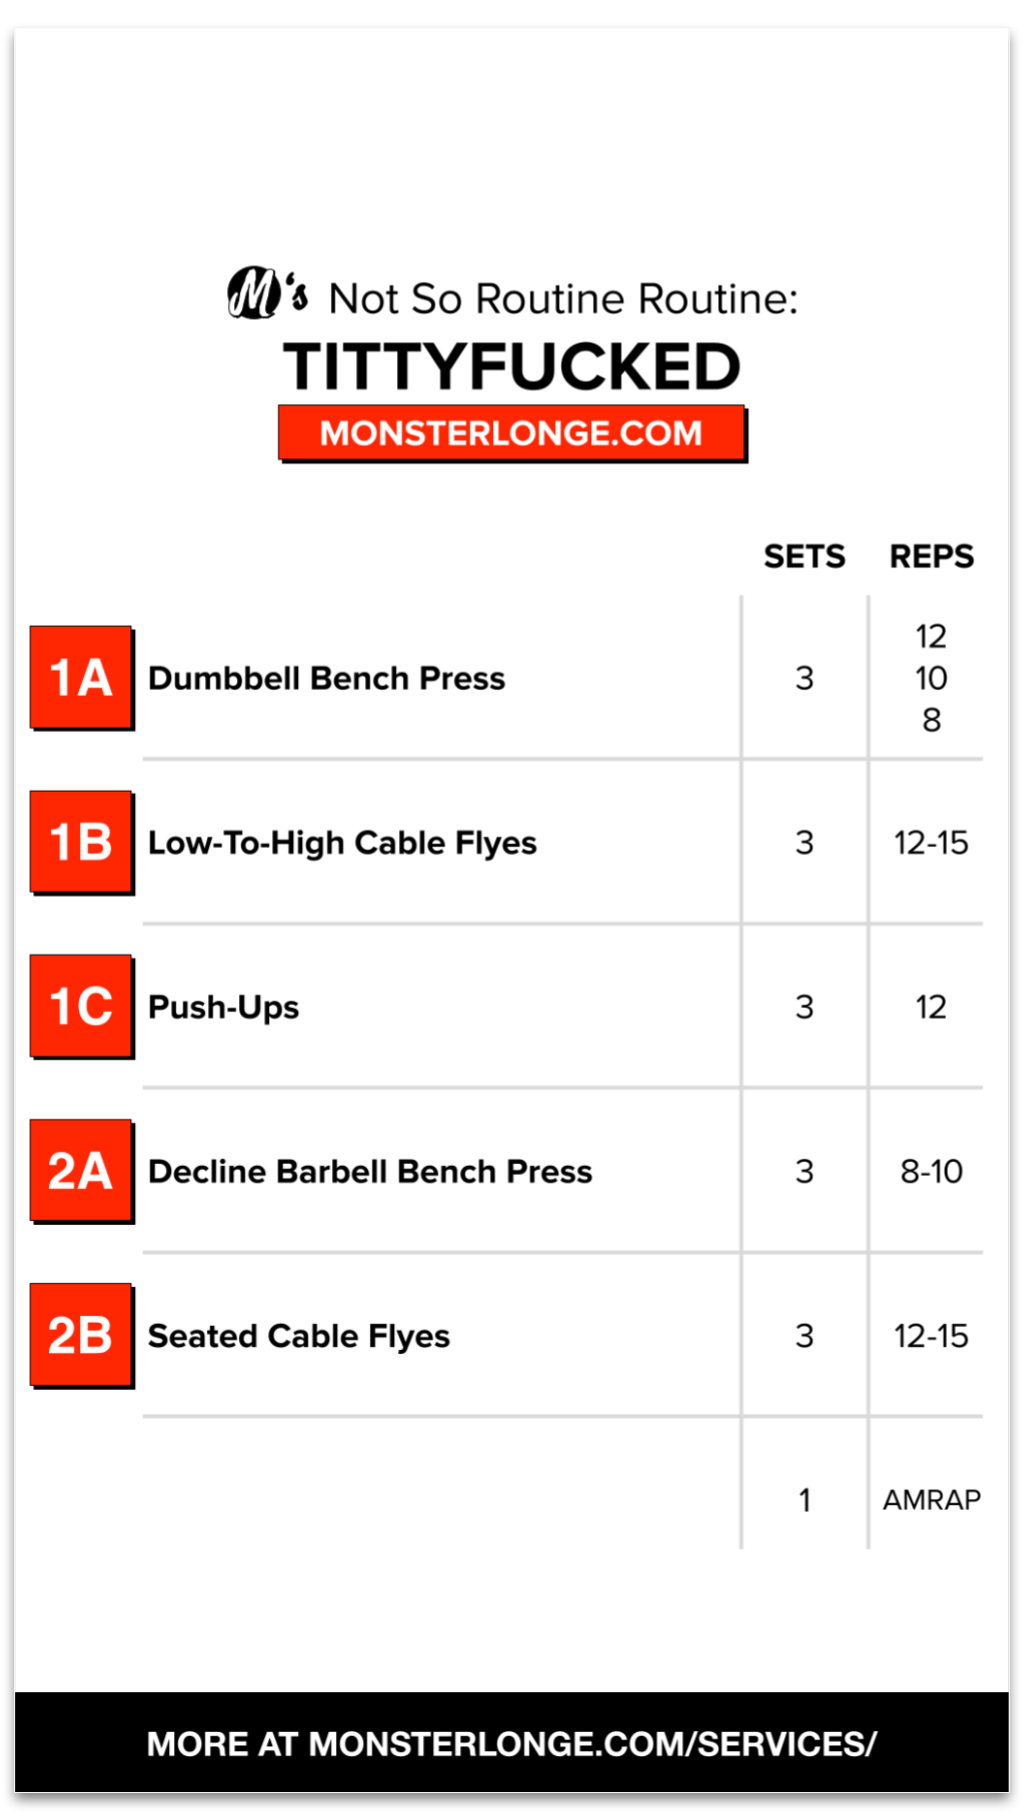 Feel the burn with this chest workout circuit!